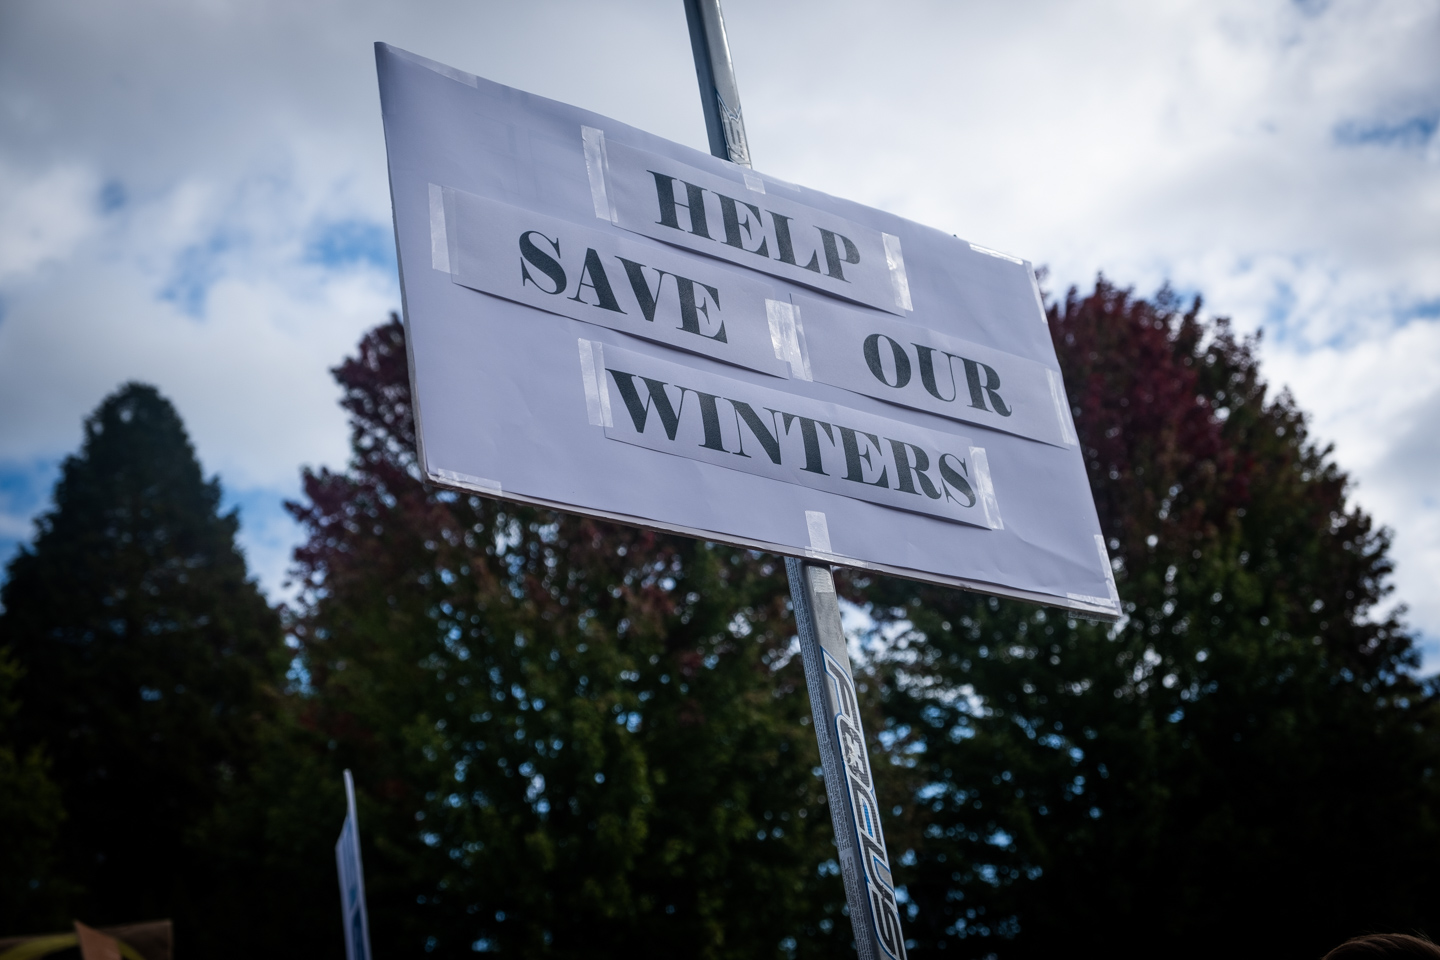 Help Save Our Winters